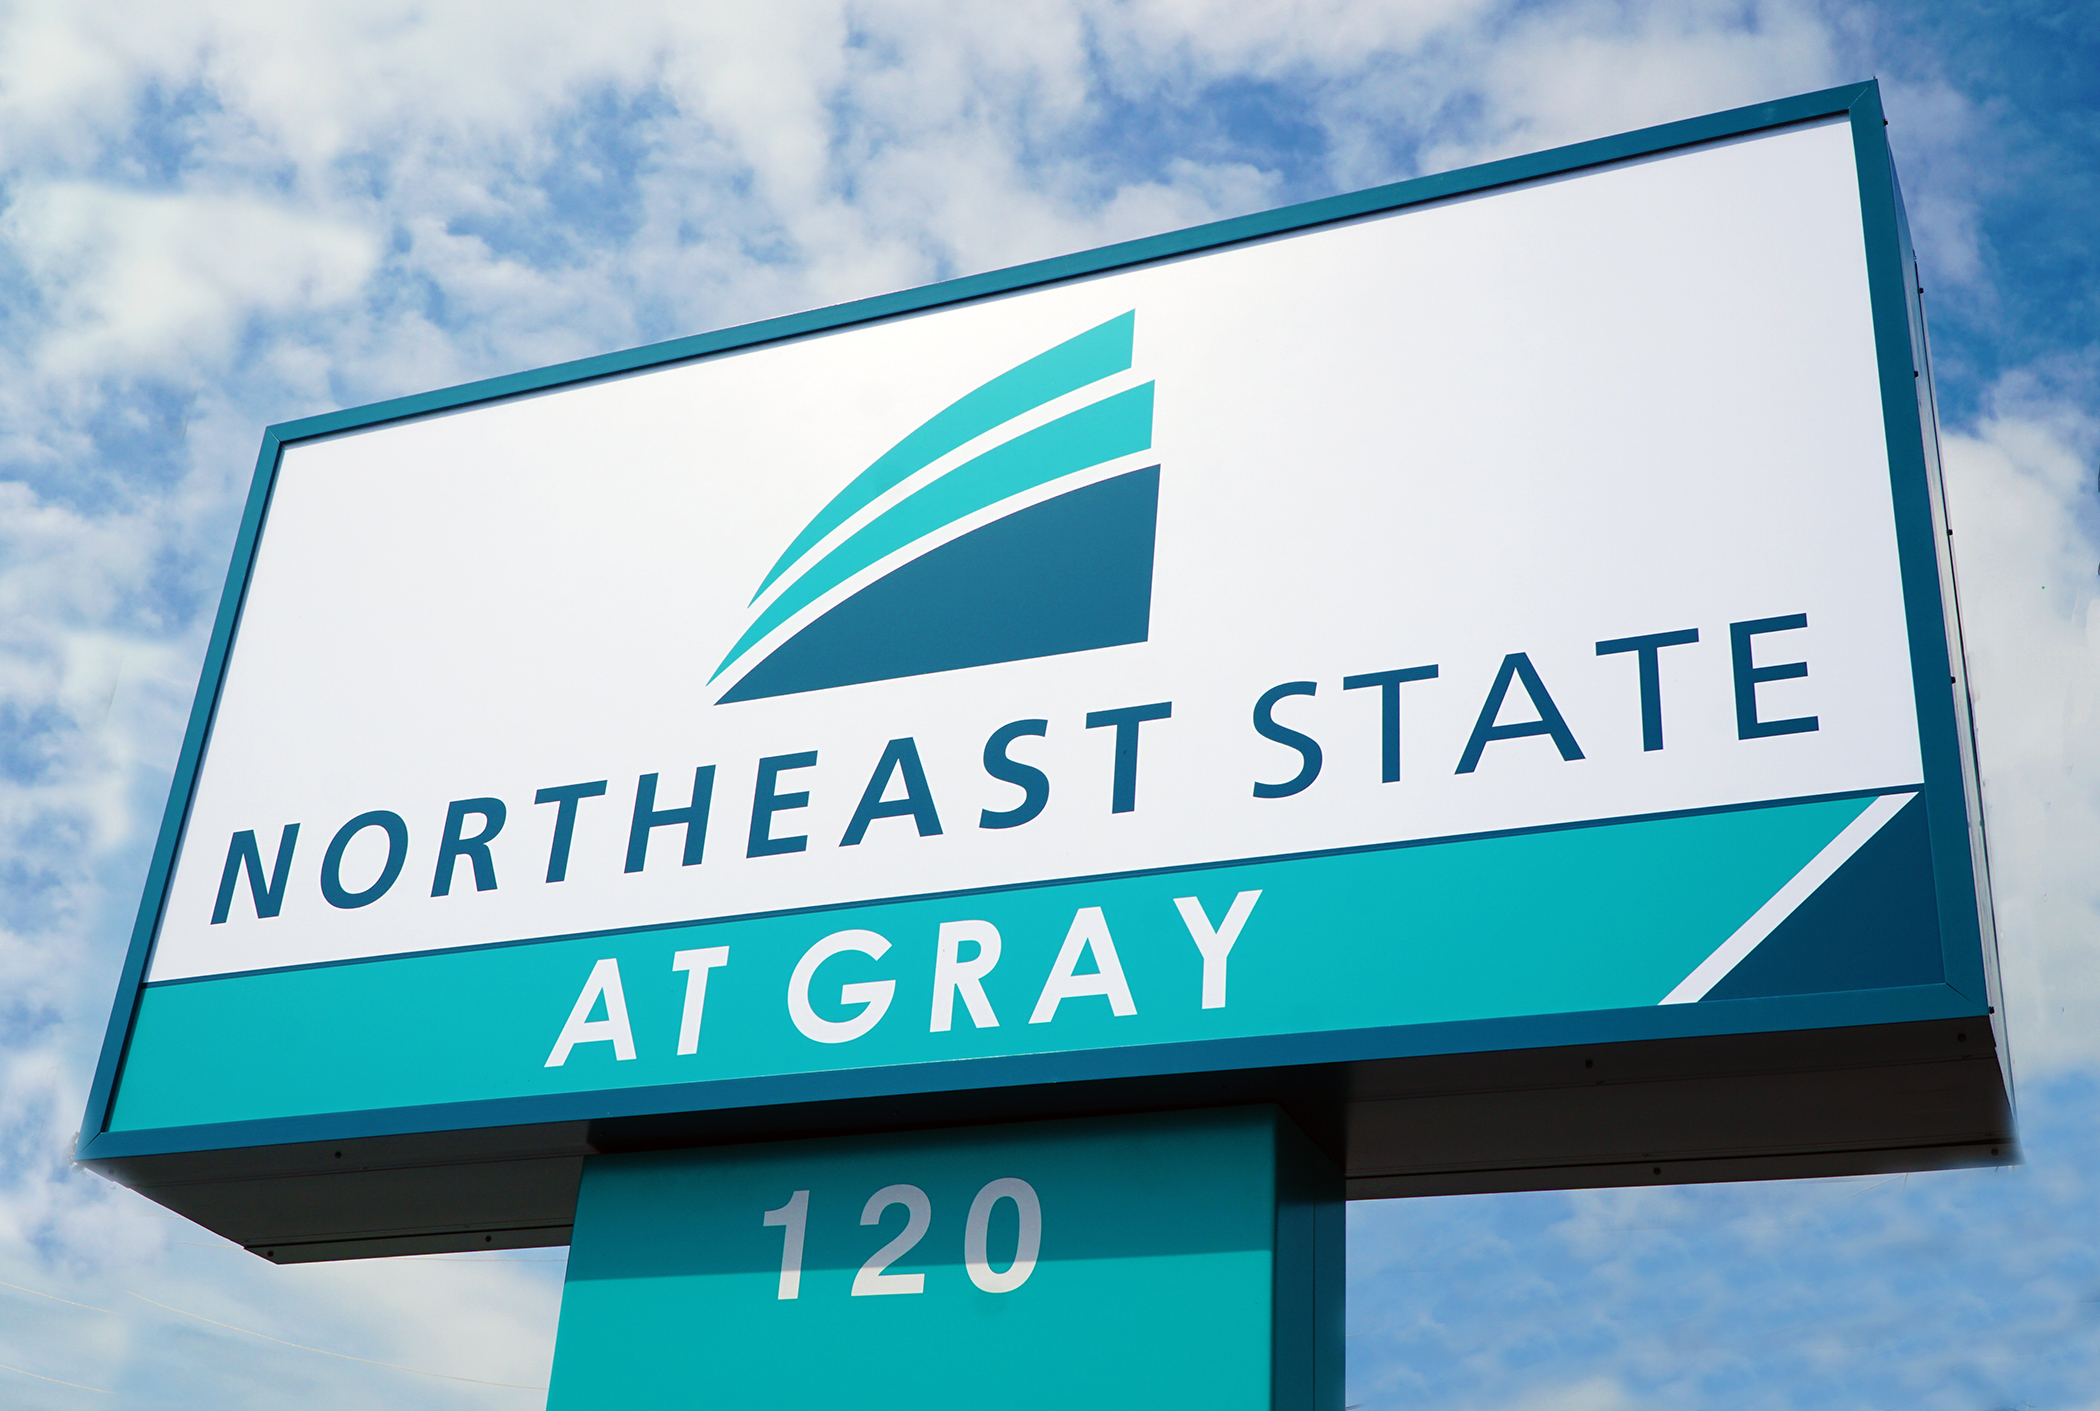 northeast-state-at-gray-sign.jpg